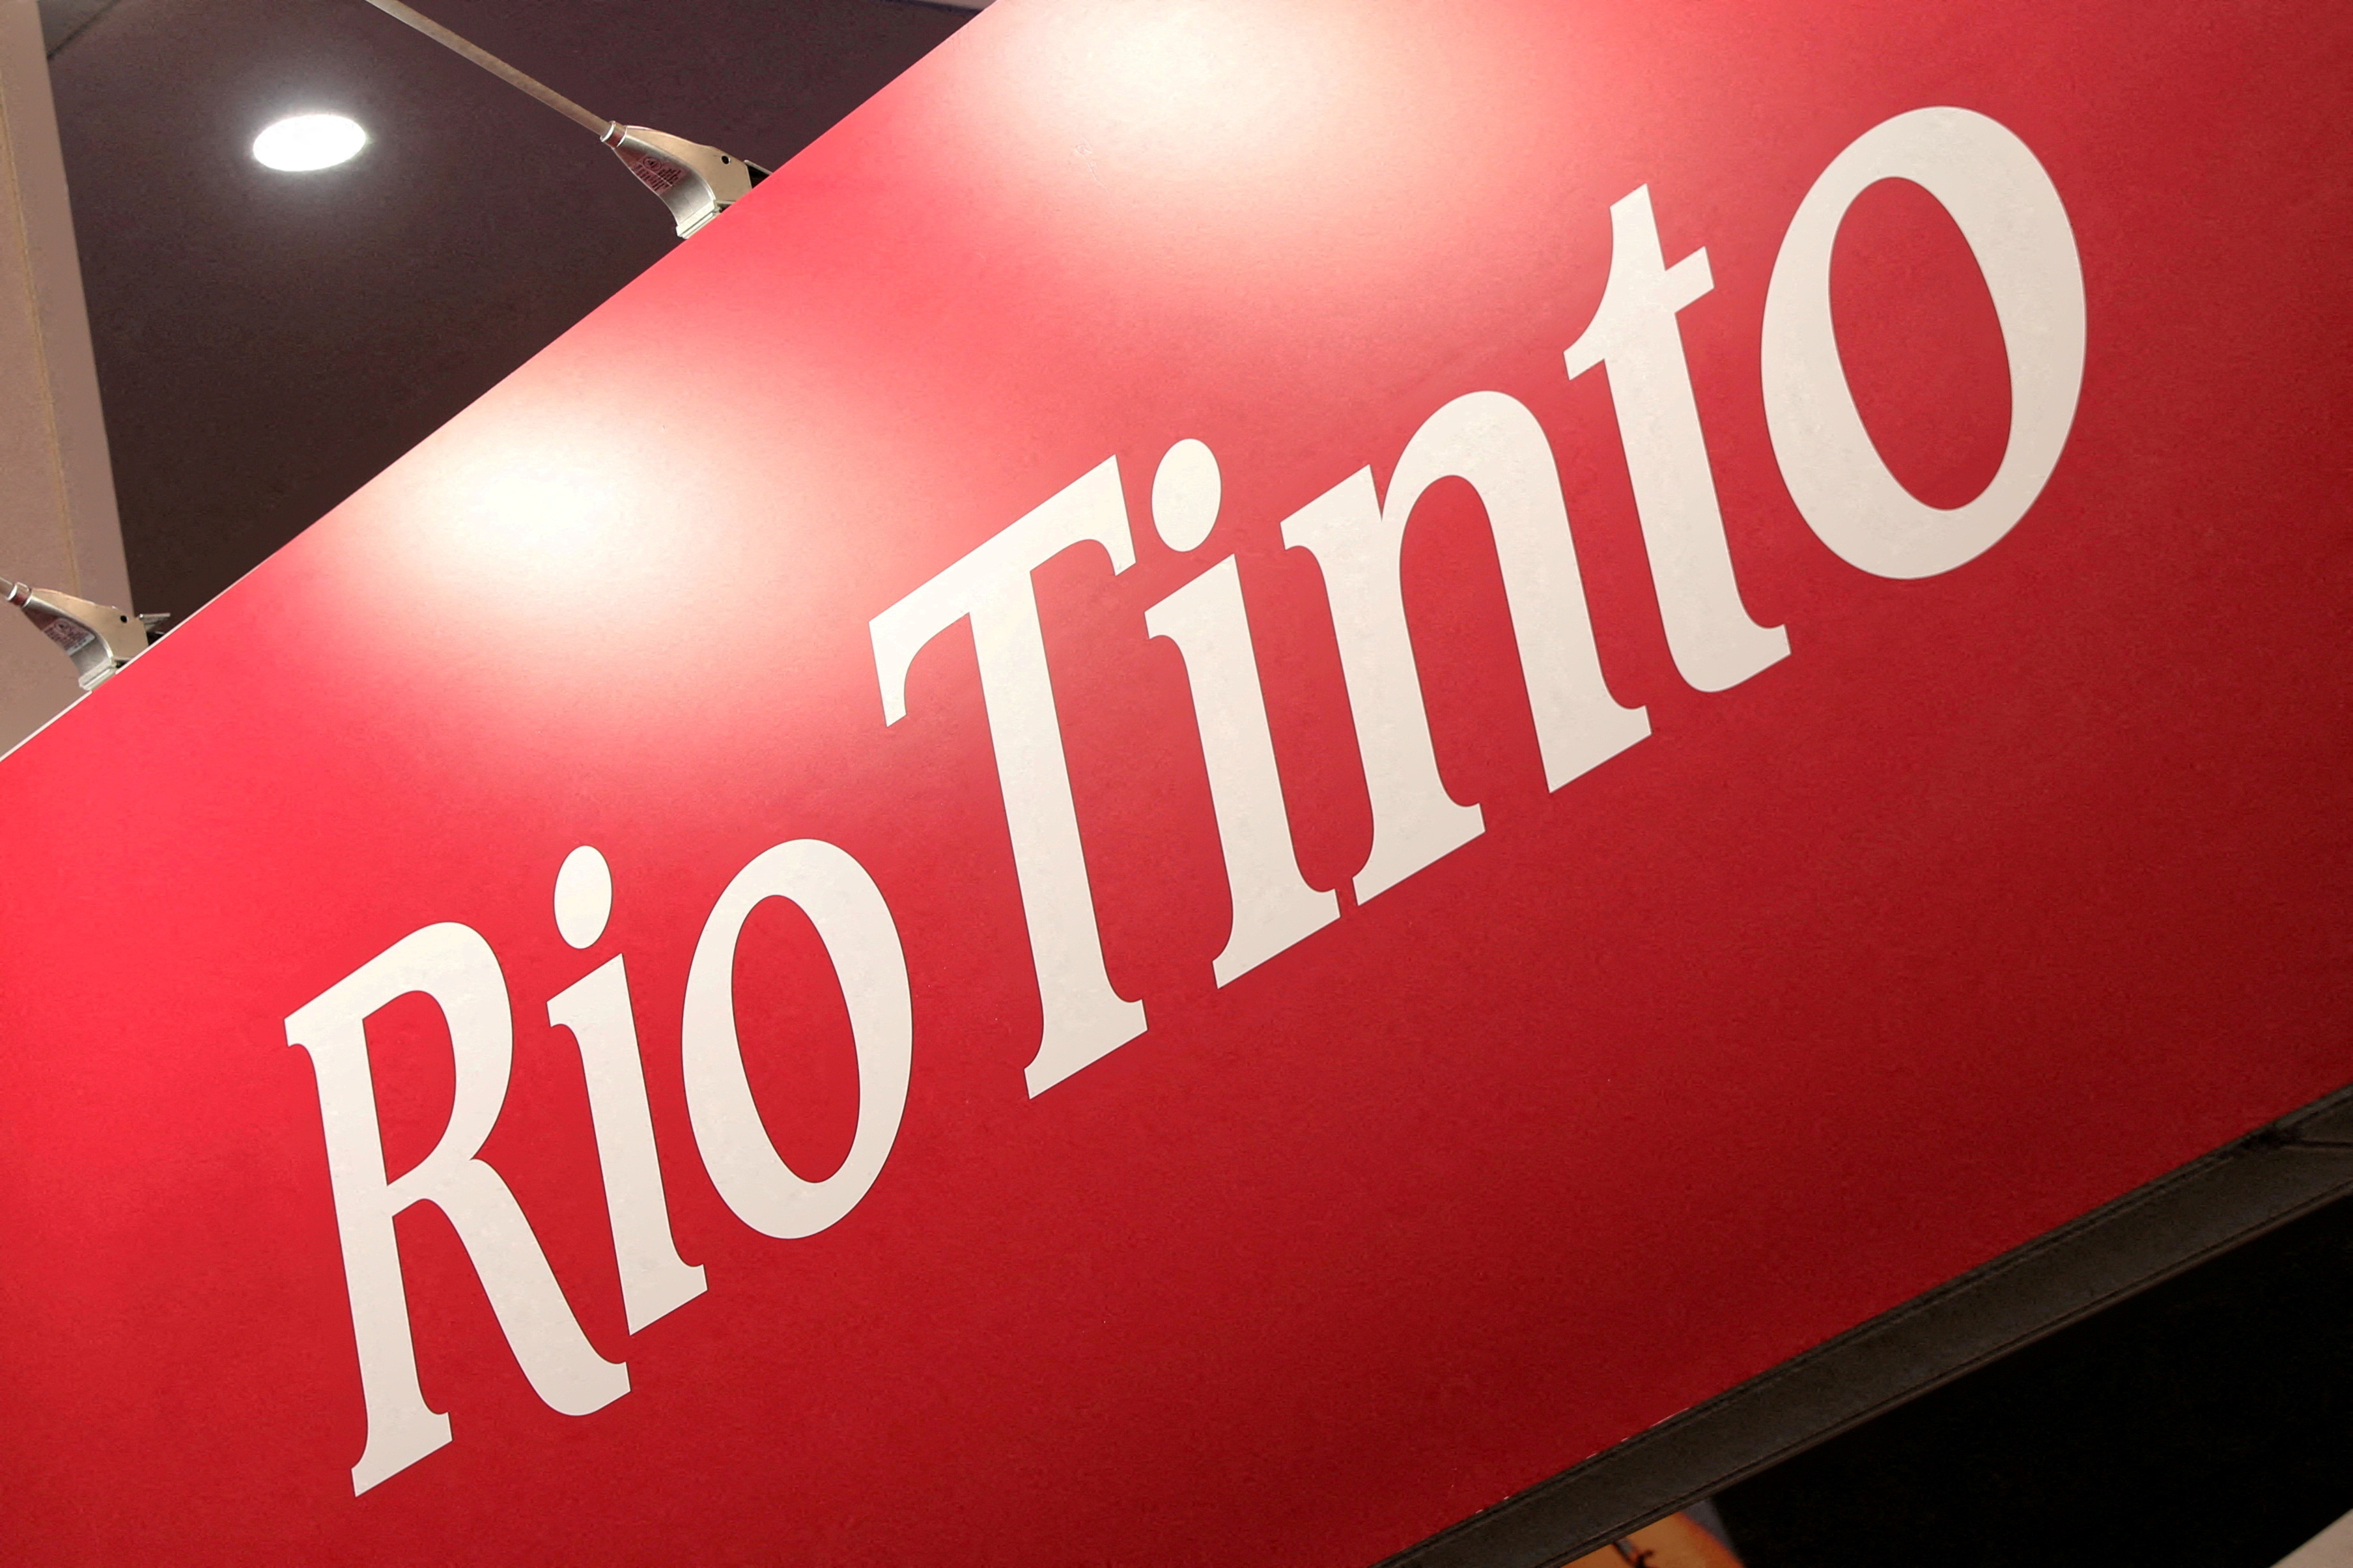 Rio Tinto warns on global slowdown risks, production issues | Reuters